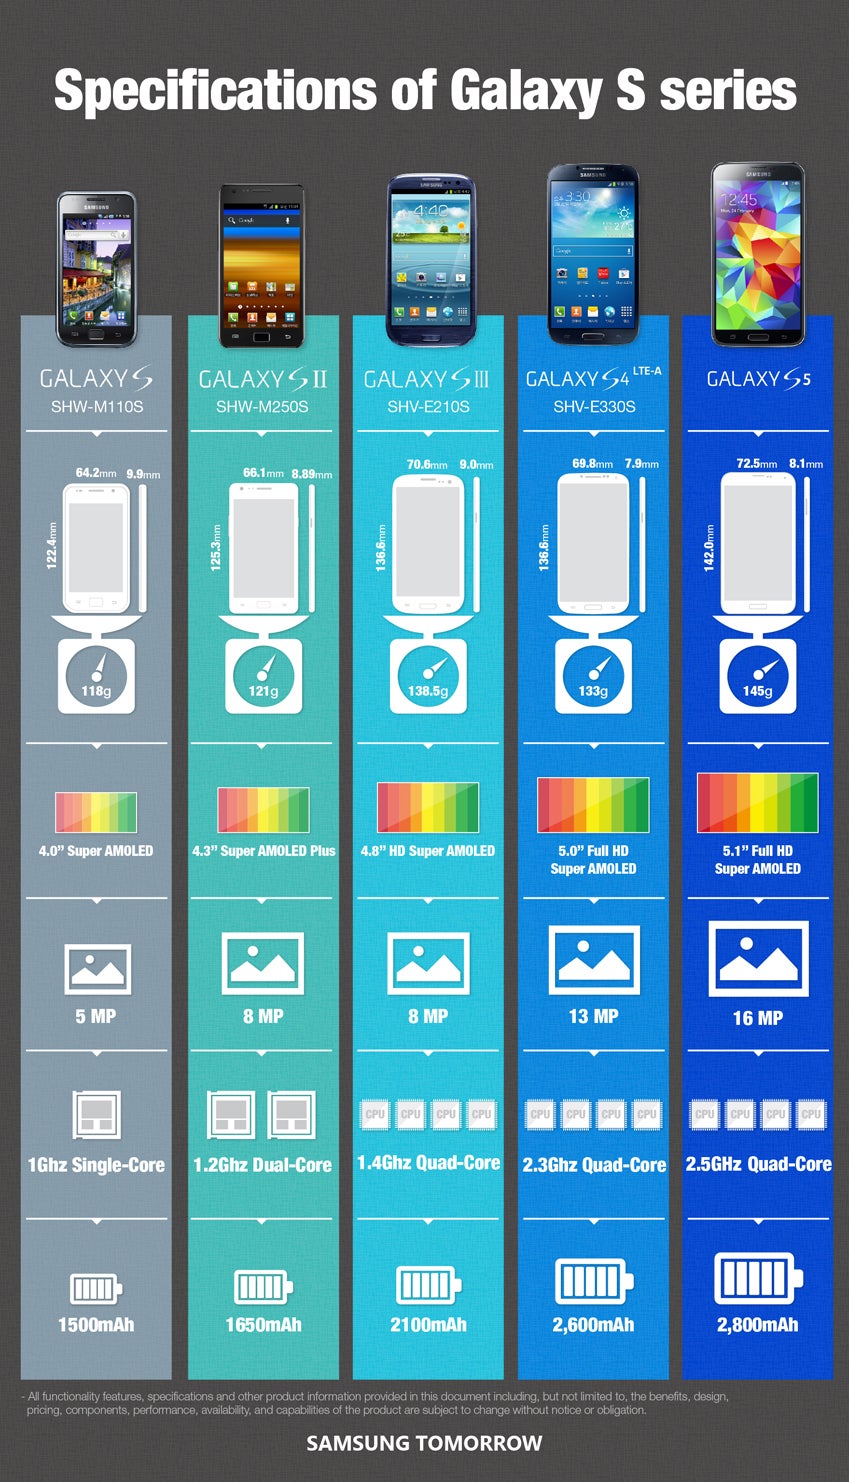 Samsung takes us on a trip down Memory Lane - Samsung infographic shows us how far the Samsung Galaxy S line has come